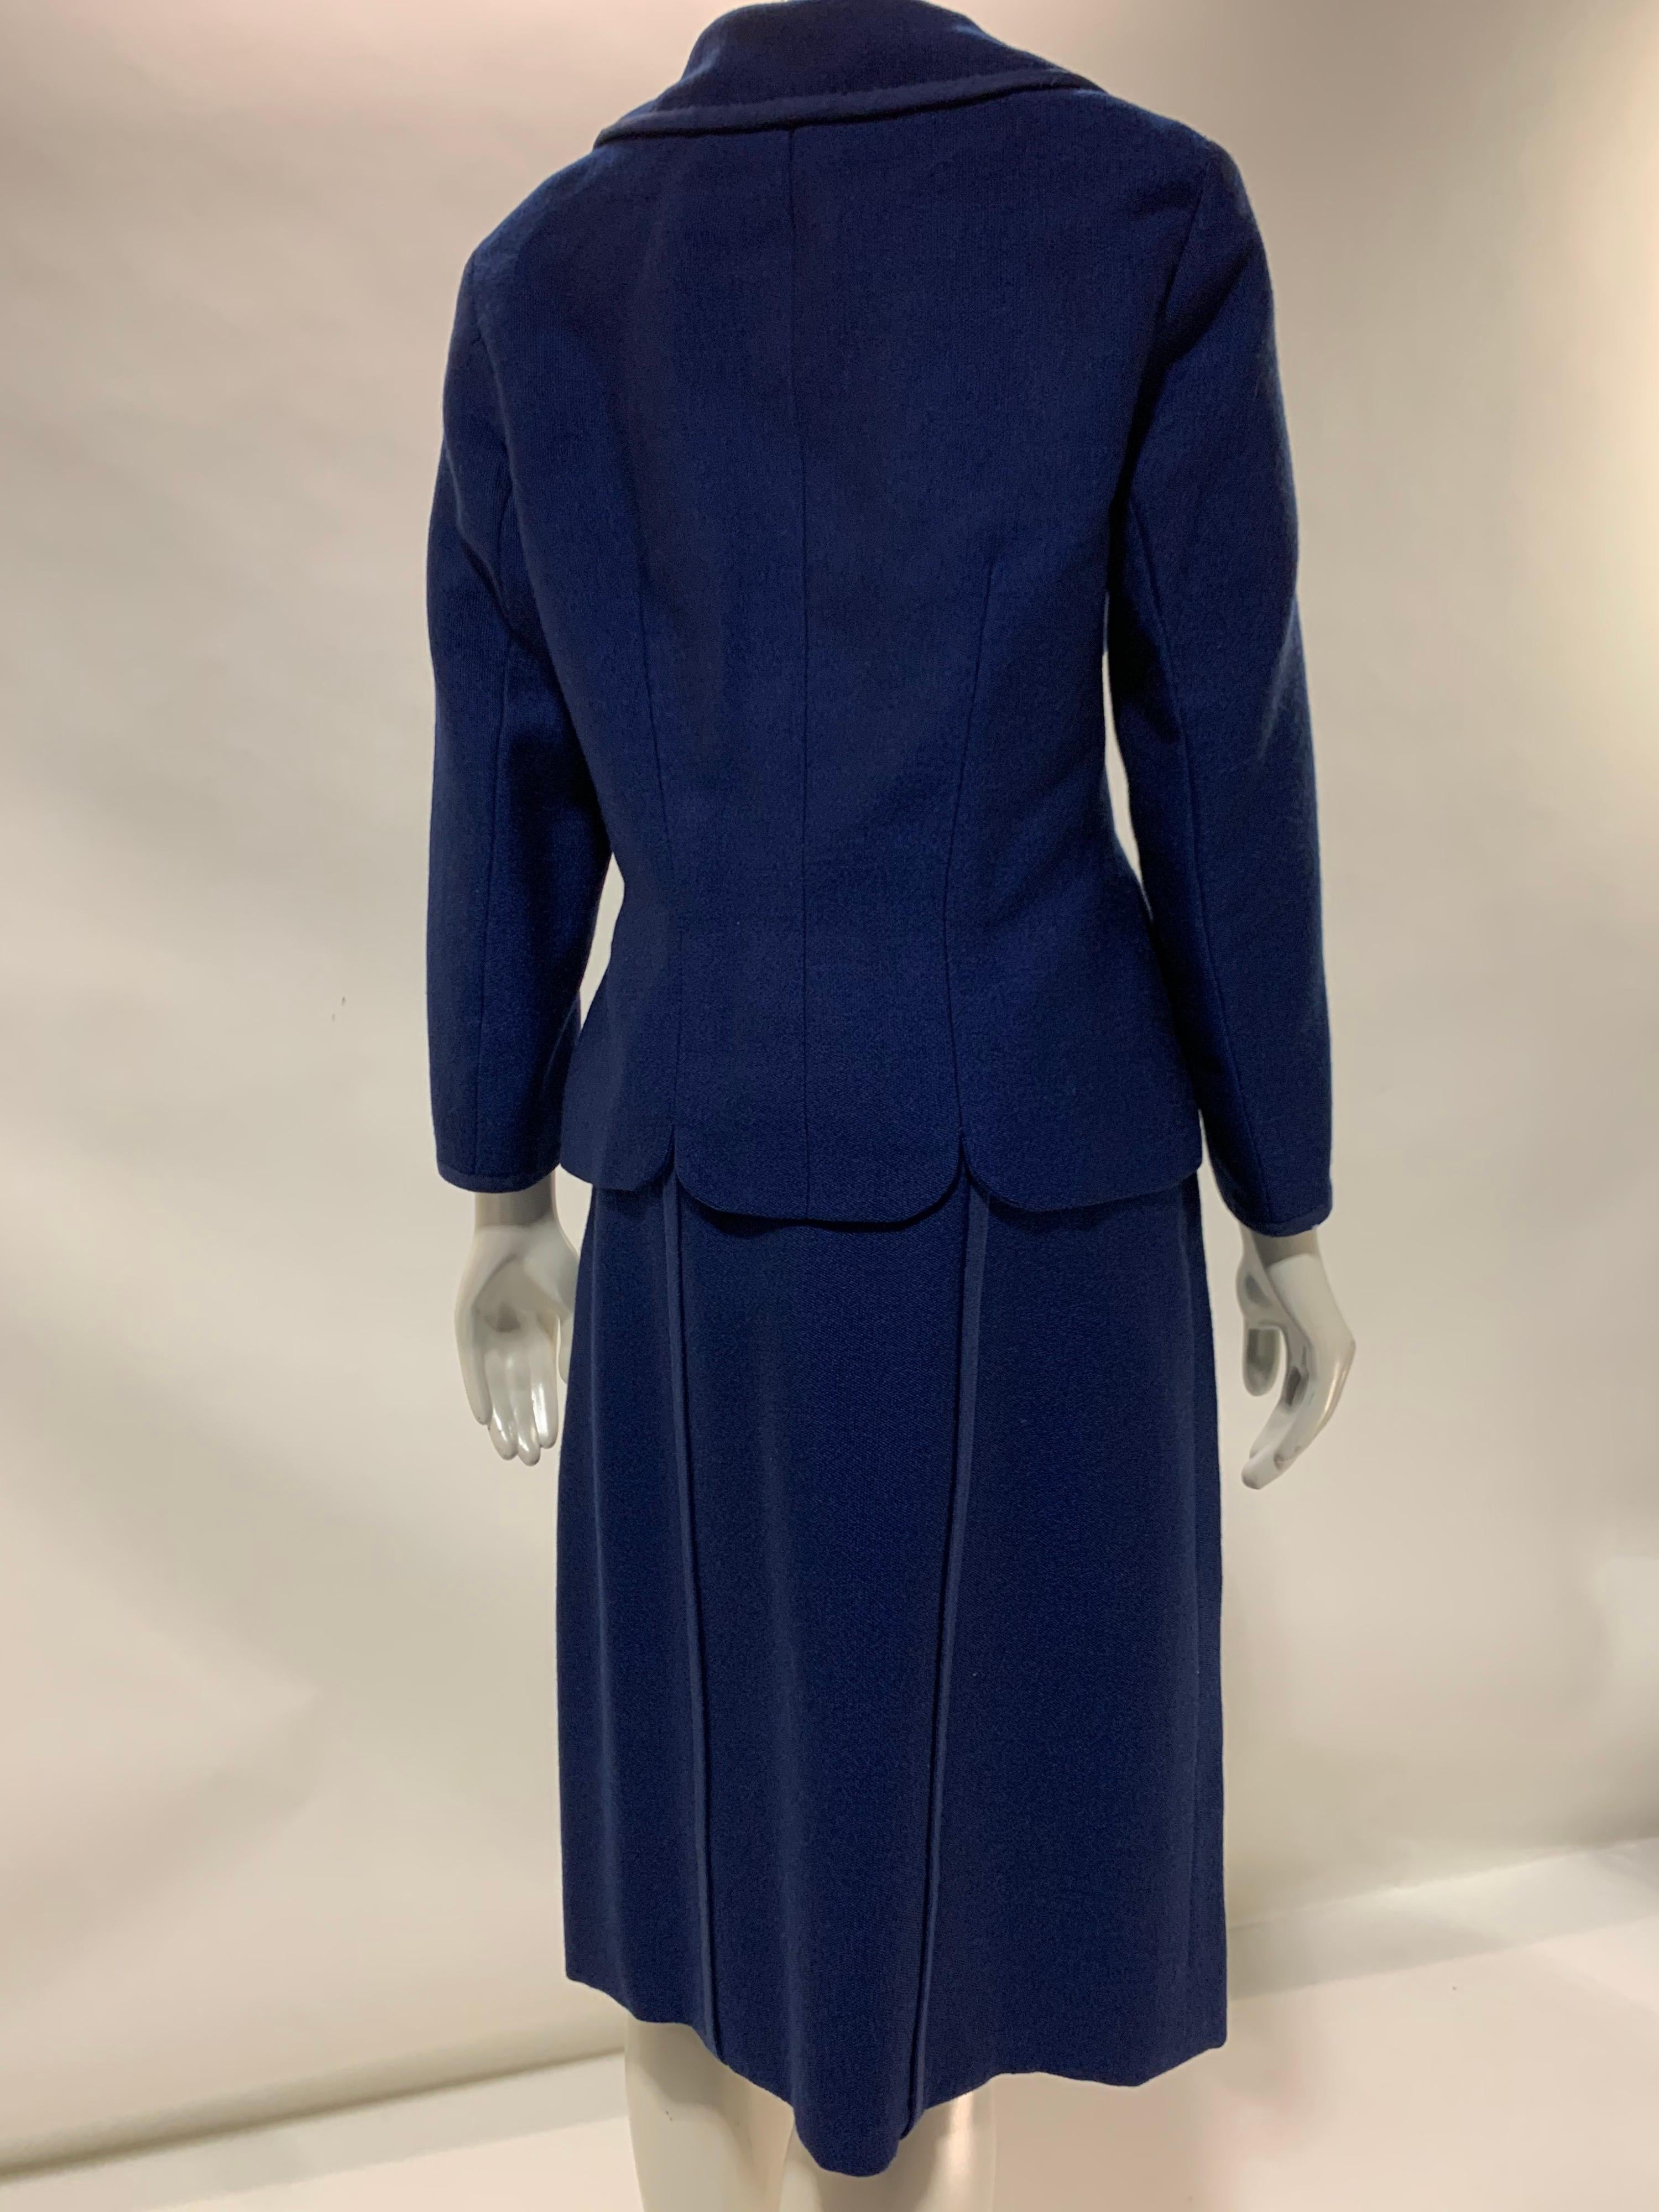 1940s Creed of London Finely Tailored Couture Royal Blue Skirt Suit w/ Caplet  For Sale 2